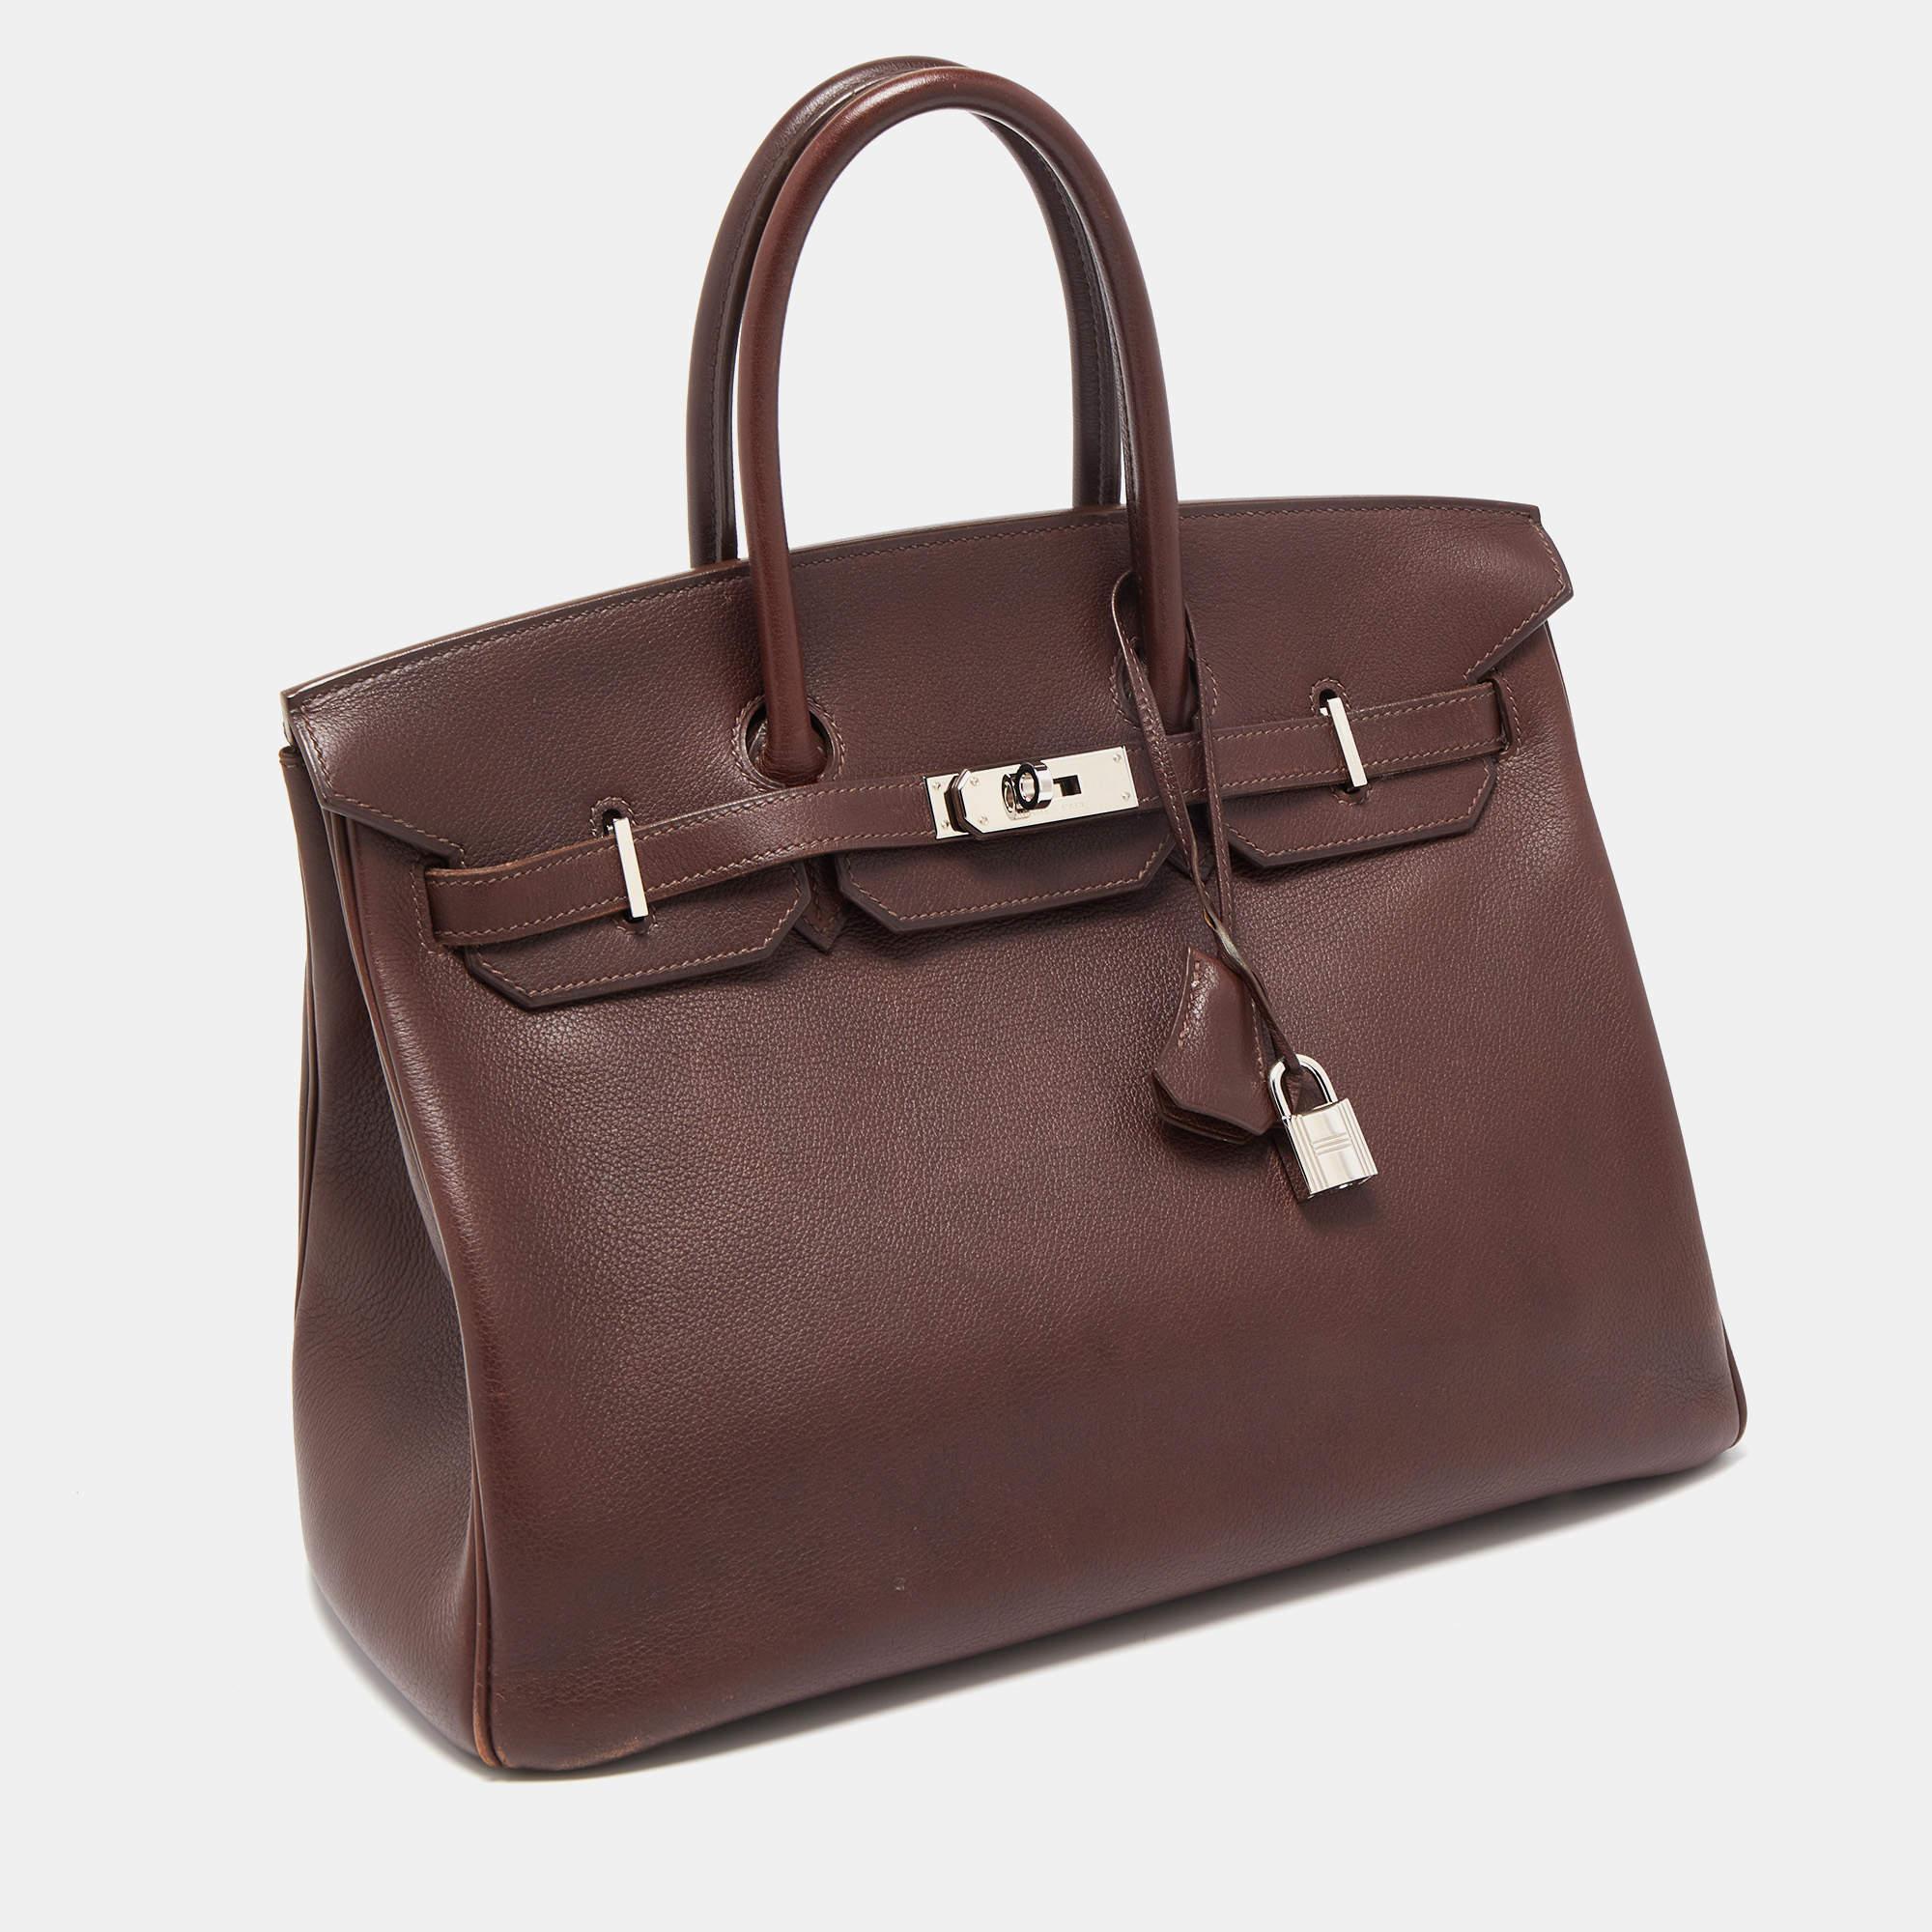 The Hermès Birkin is rightly one of the most desired handbags in the world. Handcrafted from the highest quality leather by skilled artisans, it takes long hours of rigorous effort to stitch a Birkin together. Crafted with expertise, the bag